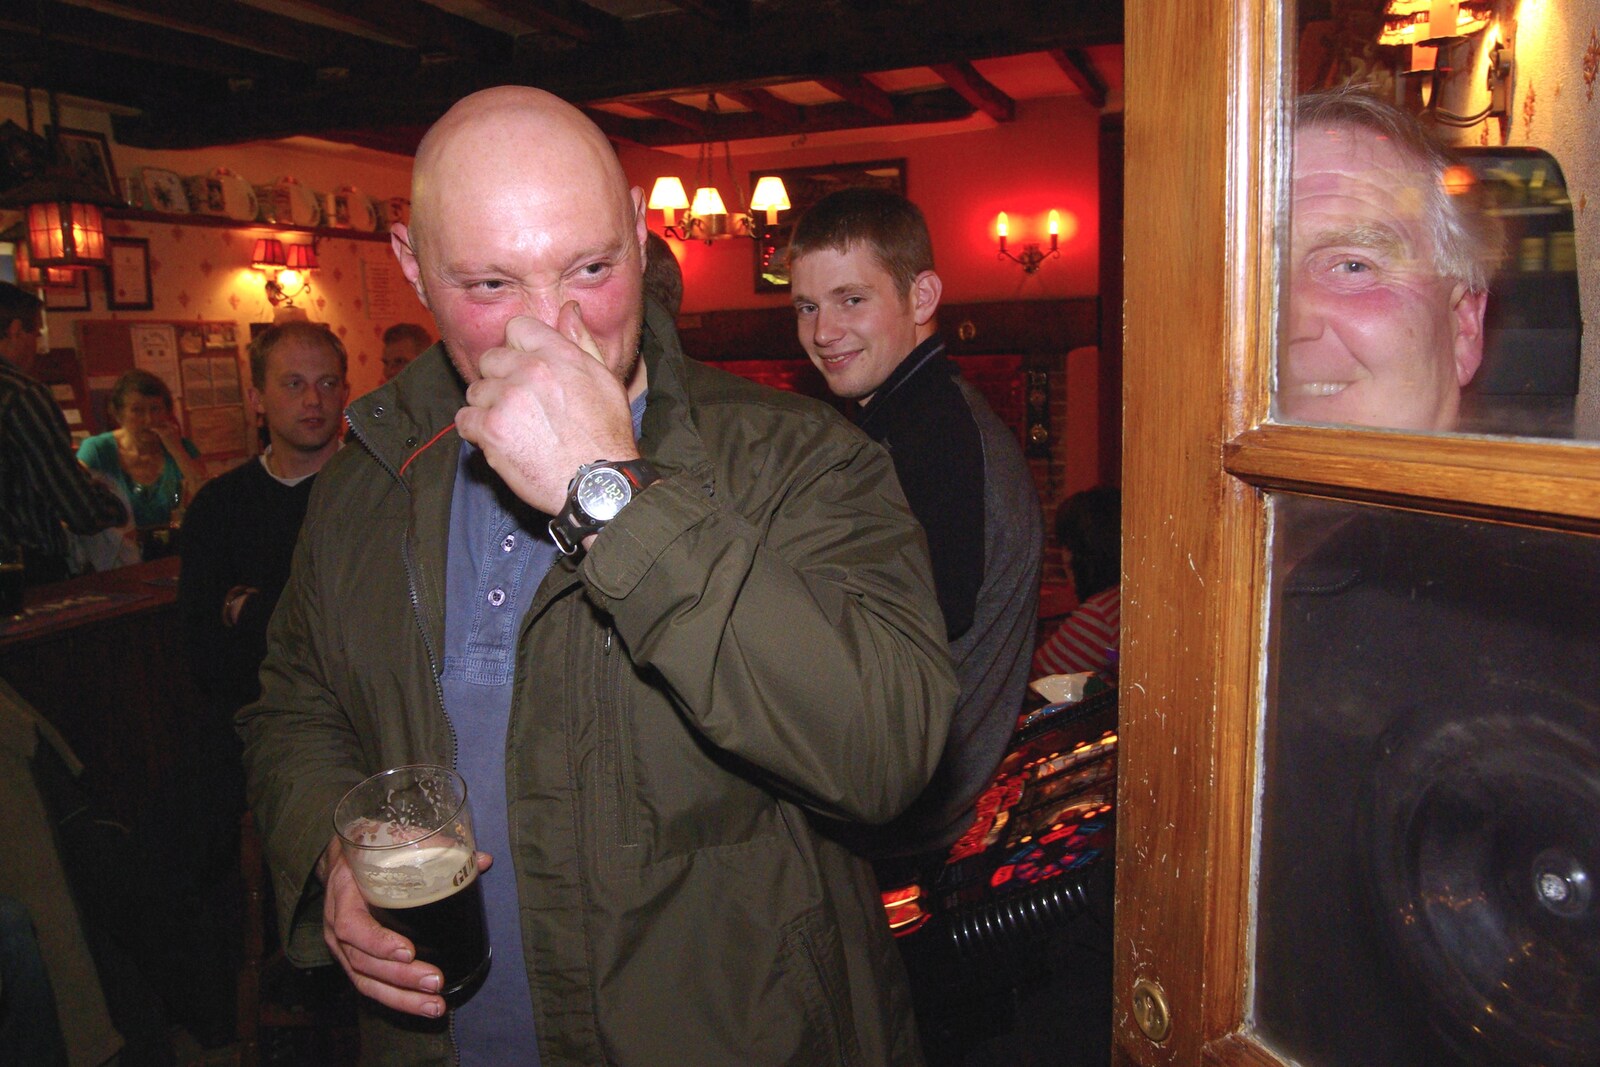 Gov guffs and stinks himself out from The Boy Phil Leaves, Swan Inn, Brome, Suffolk - 4th November 2007